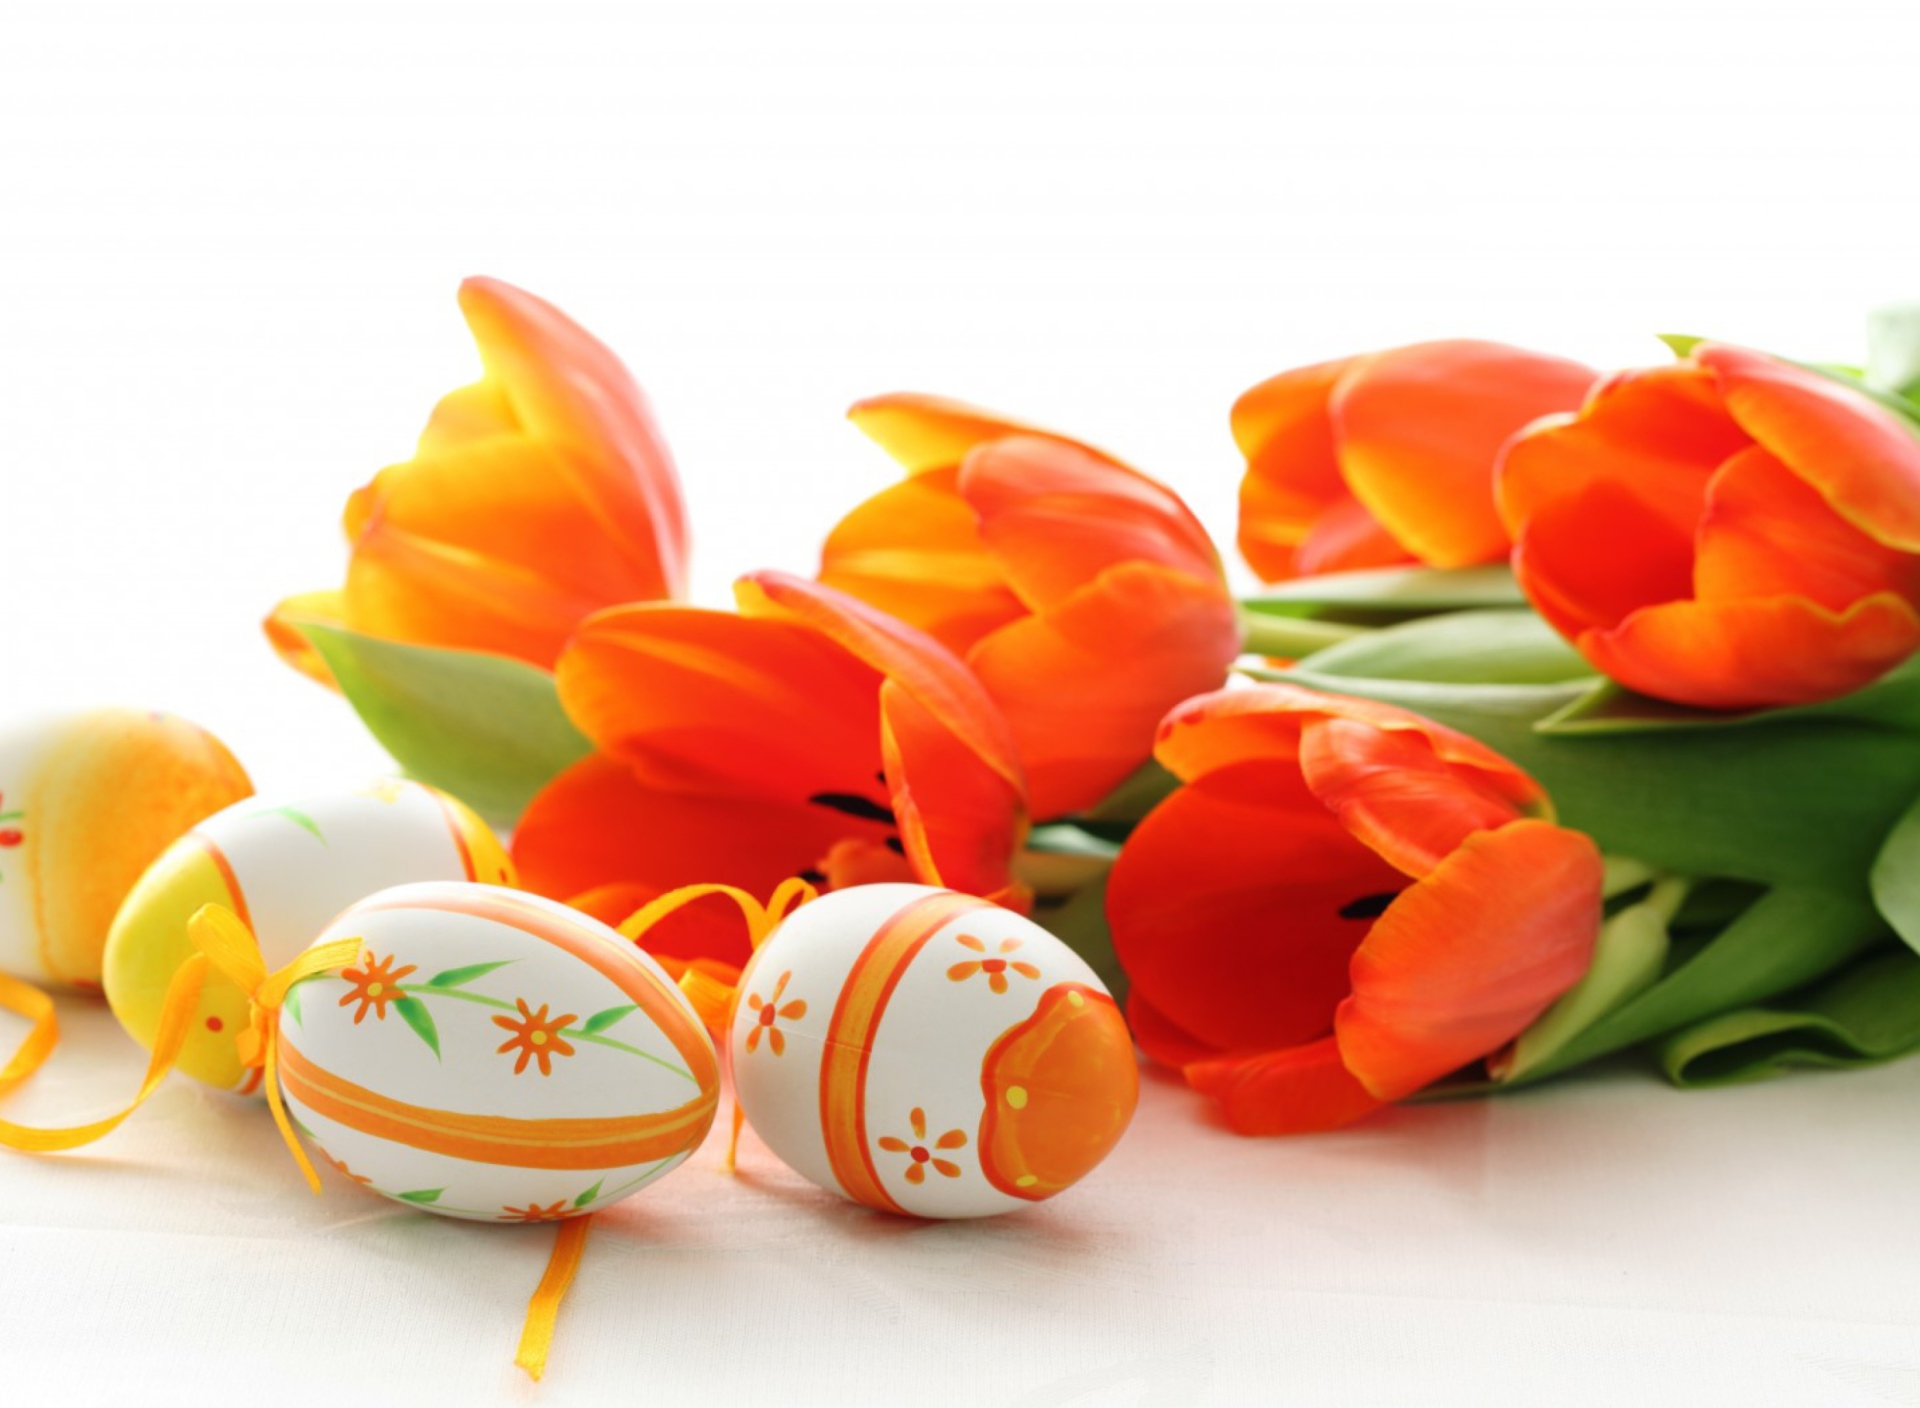 Eggs And Tulips wallpaper 1920x1408